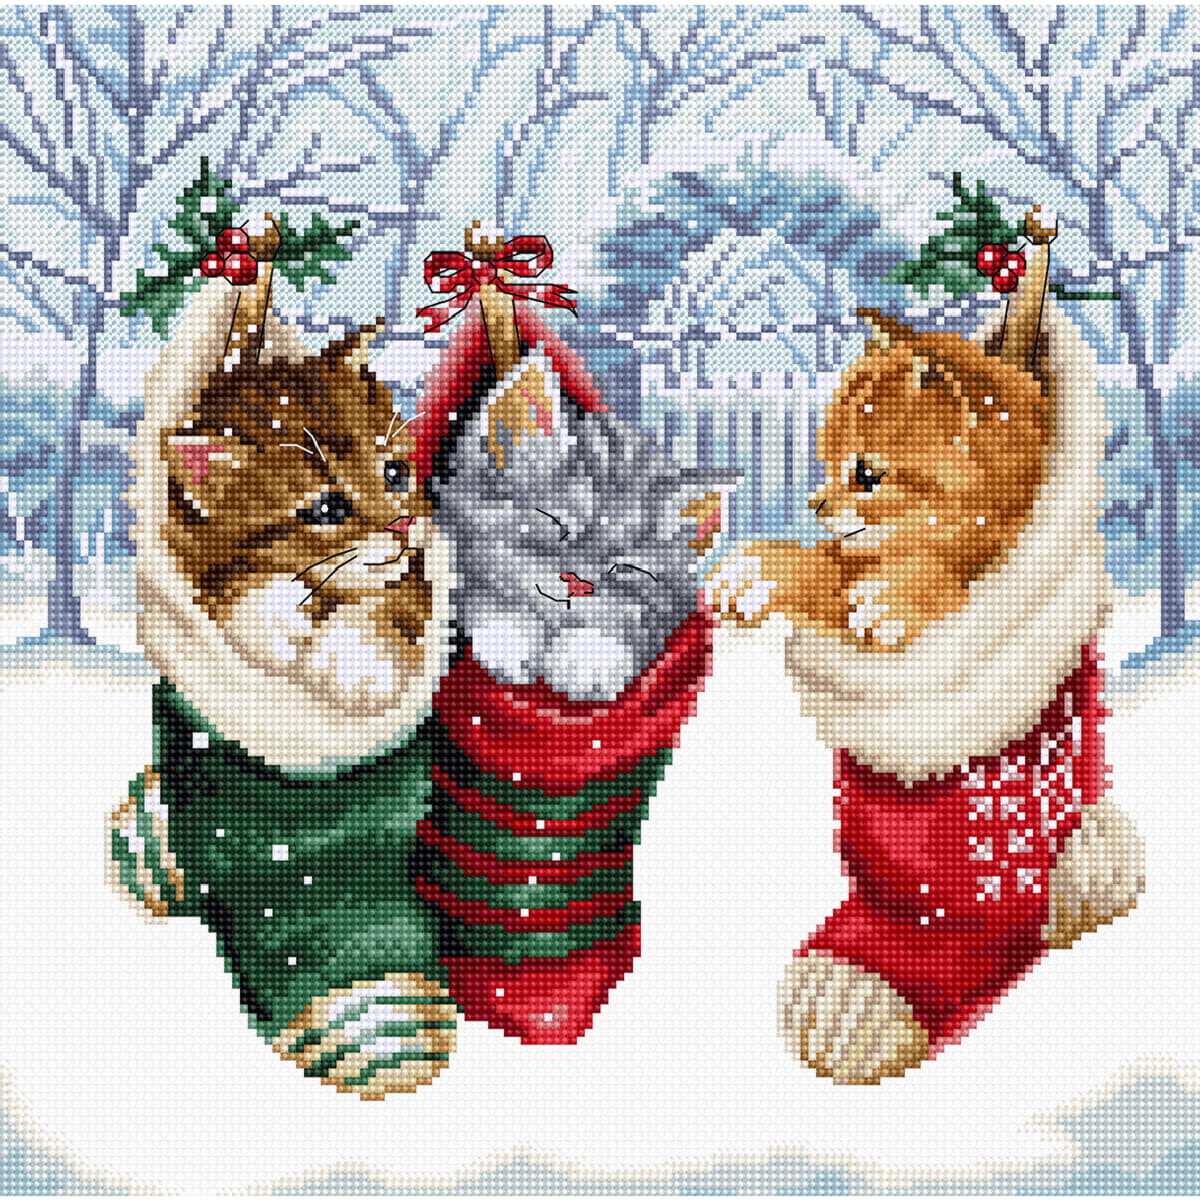 Three kittens cuddle in Christmas stockings in a snowy...